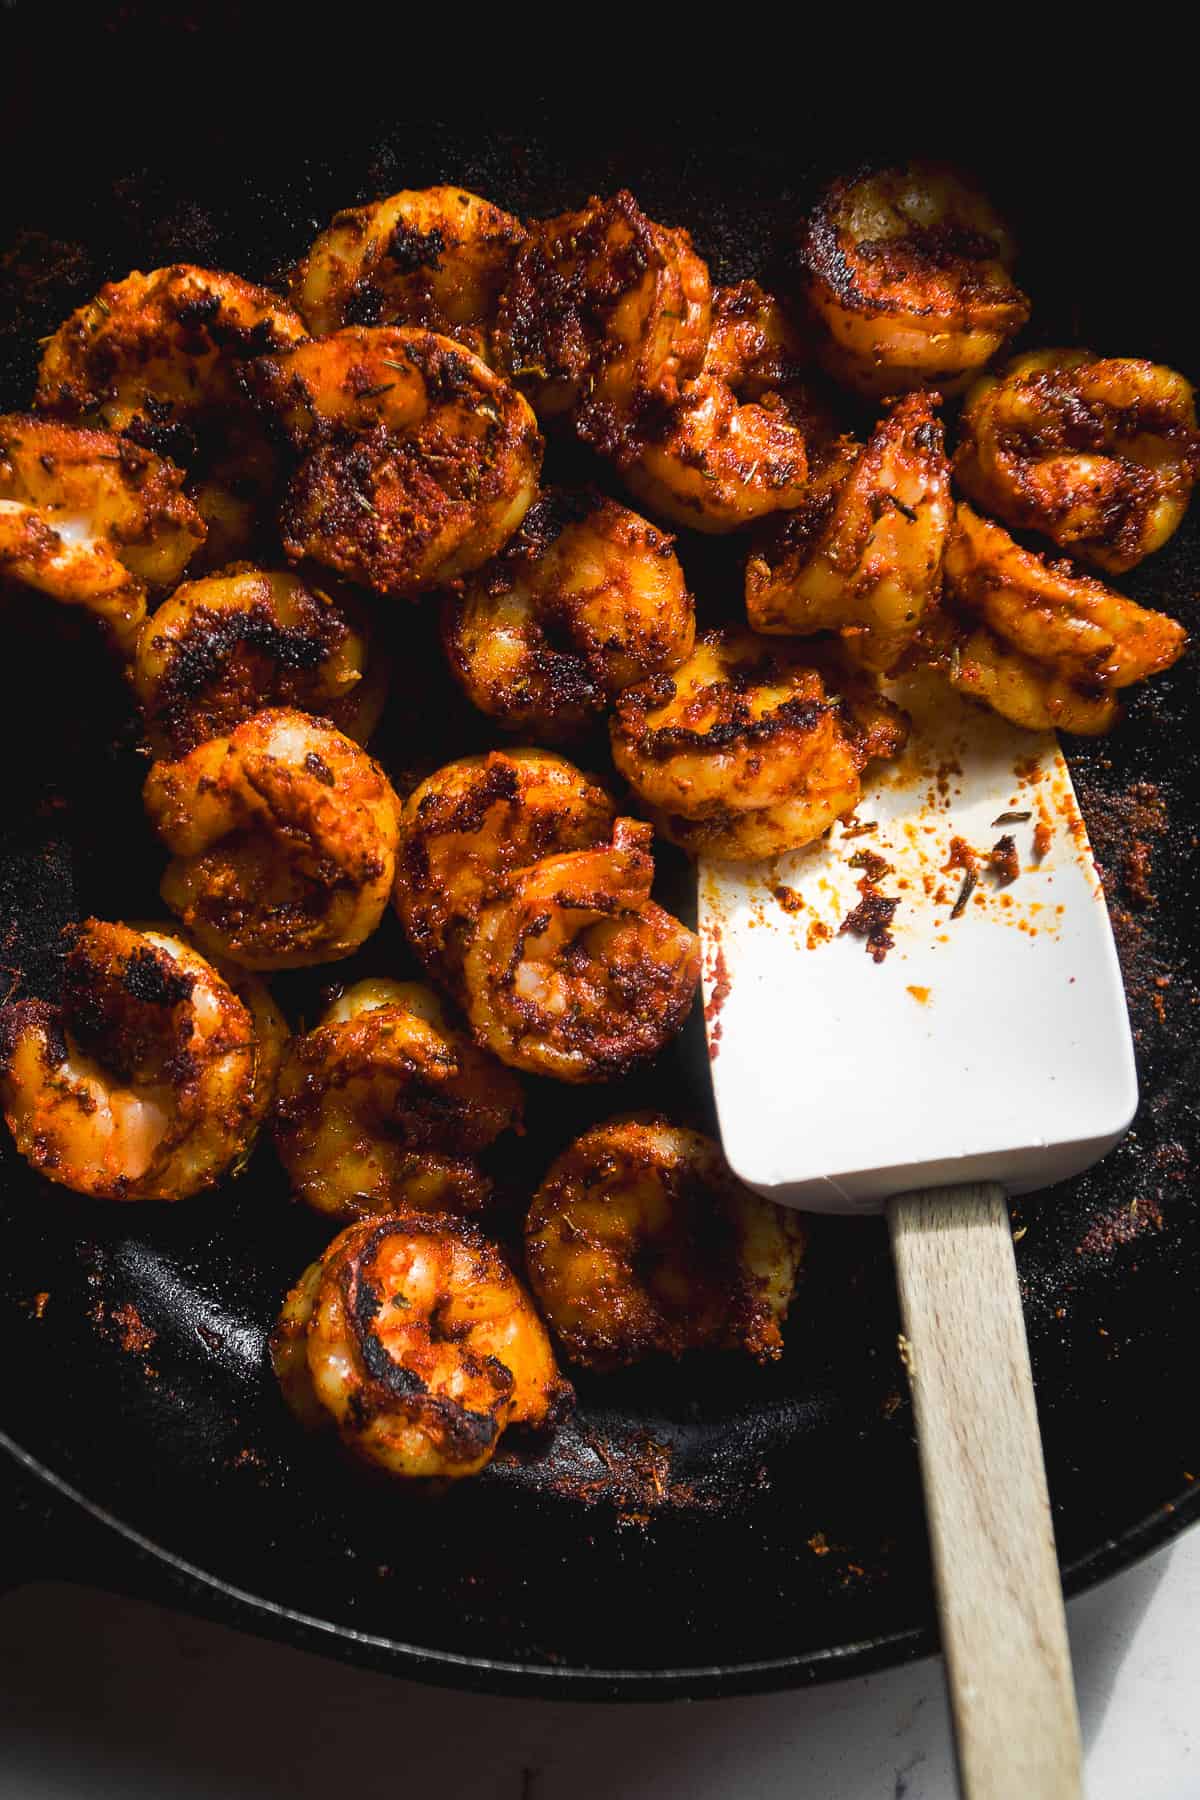 Blackened shrimp cooked in a cast iron skillet.